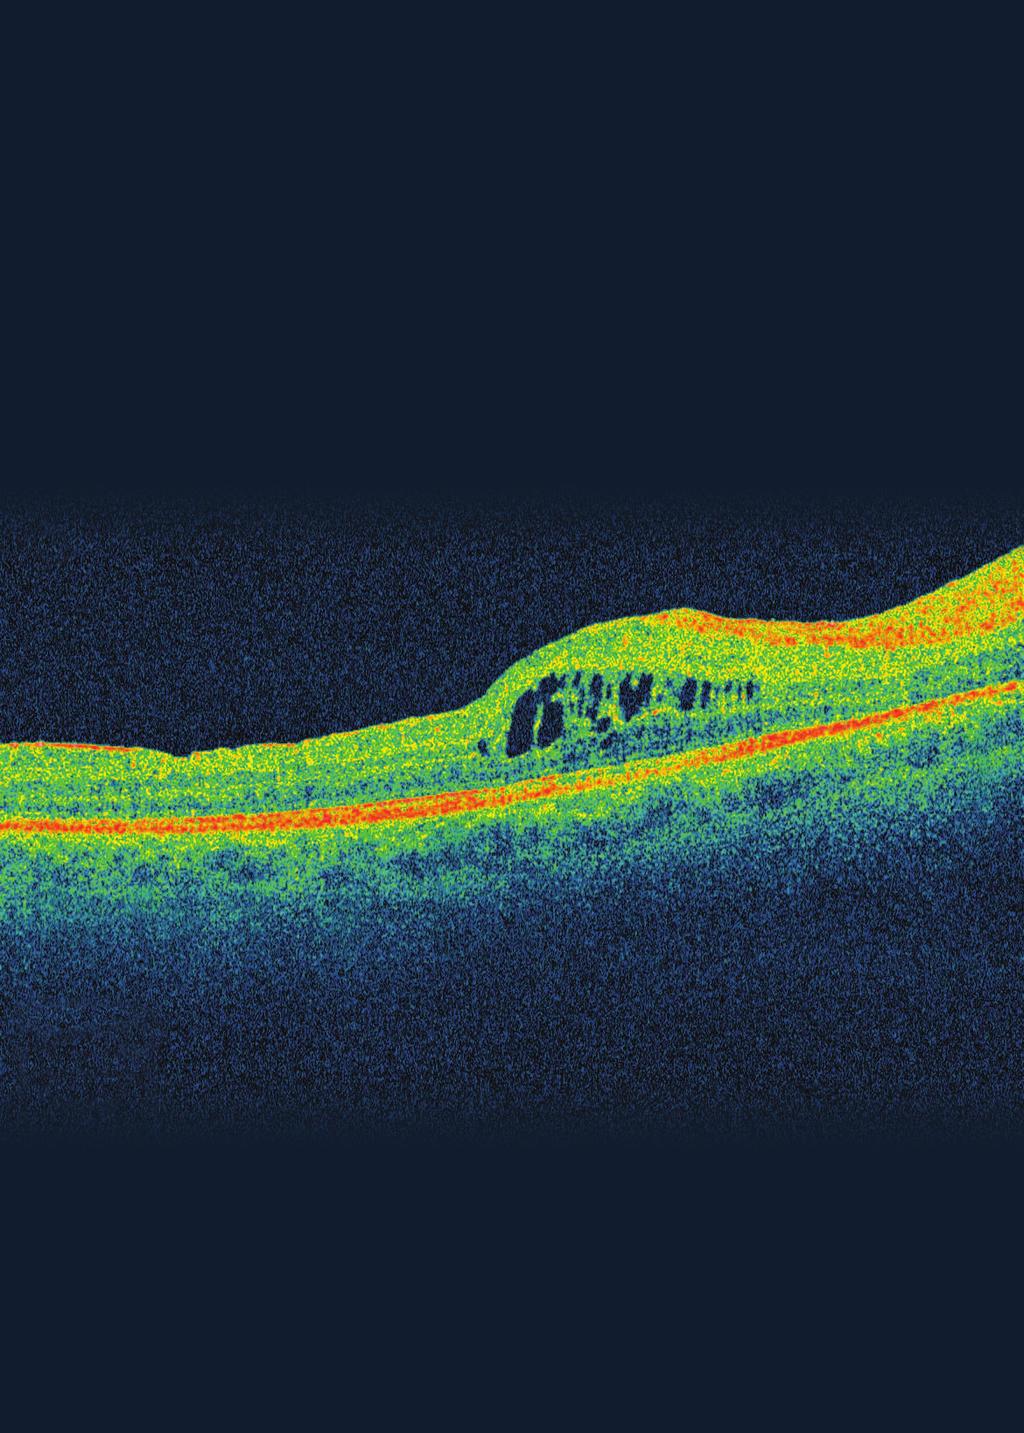 New Insights Into the Management of Diabetic Macular Edema and Related Conditions Highlights of a symposium held in New York City. Contents 4 Laser Therapy s Role in Managing DME By Susan B.